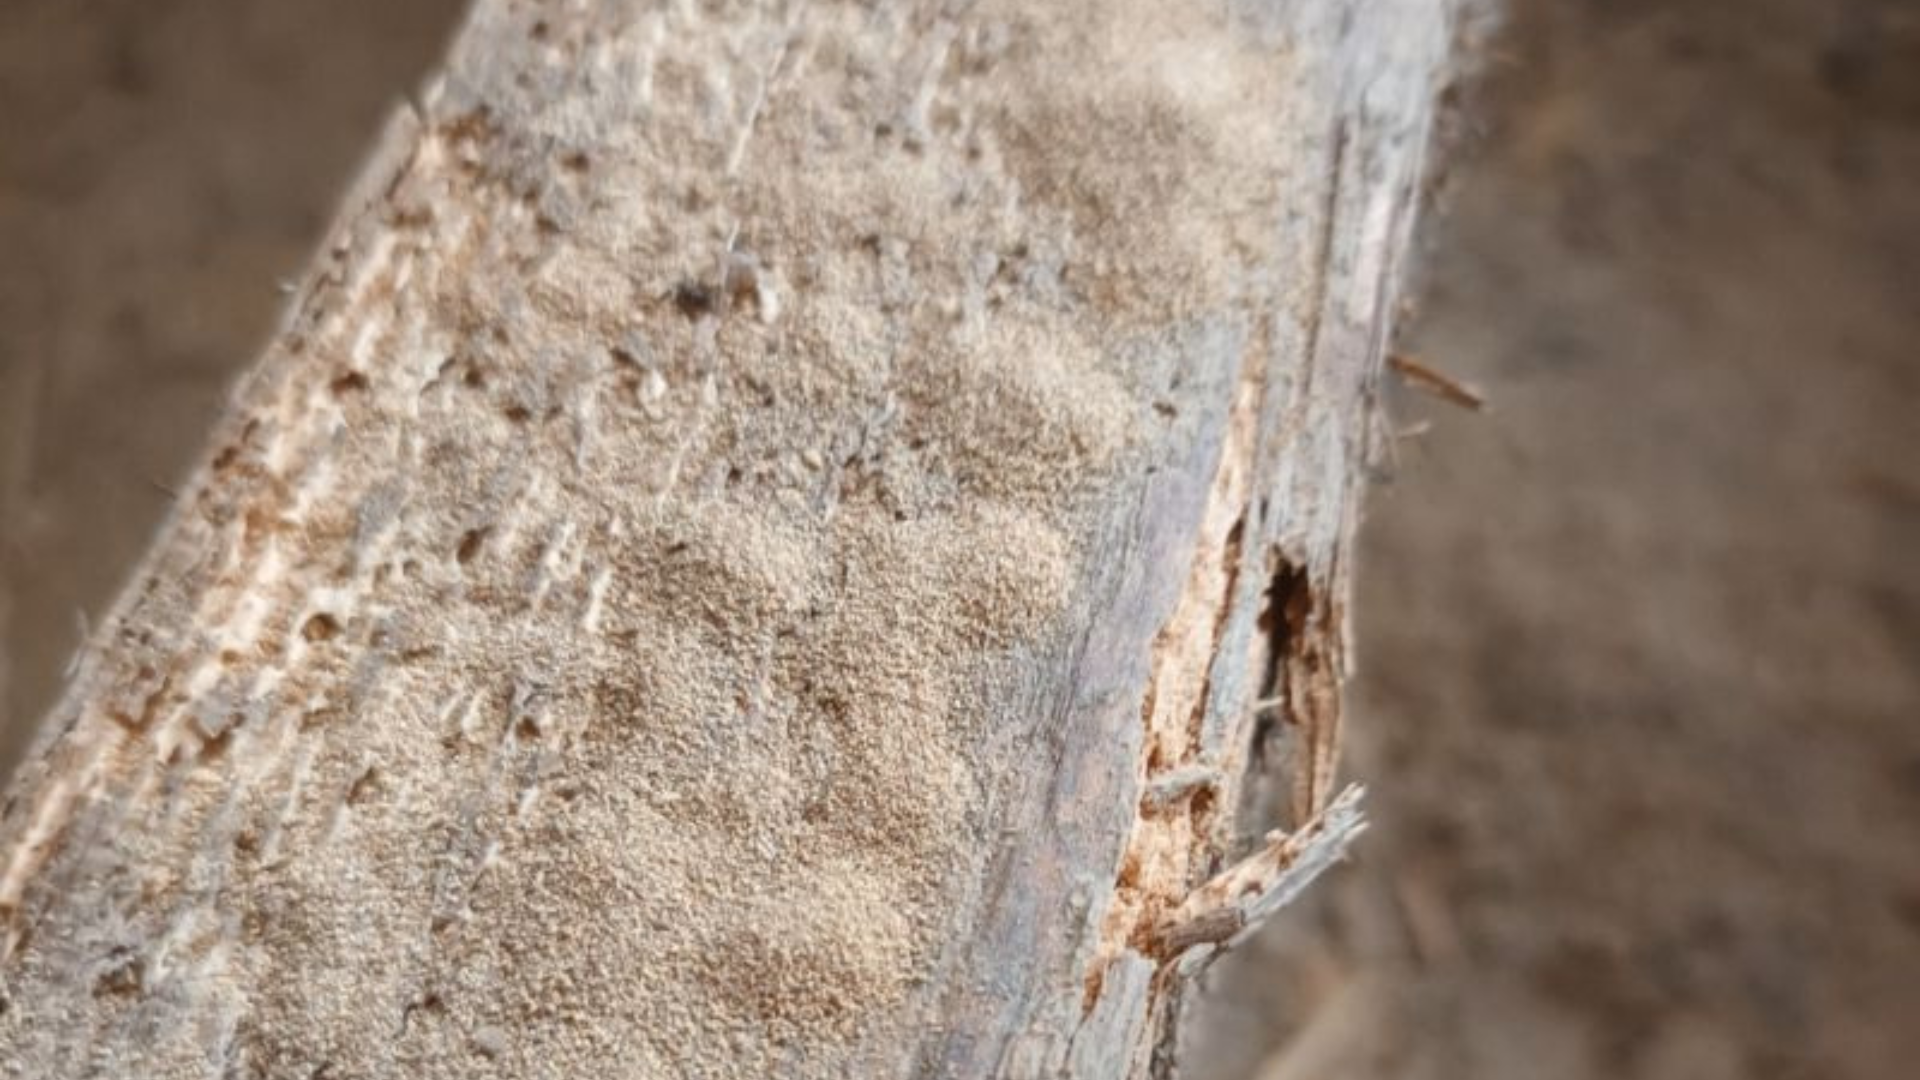 A floor joist affected by woodworm, showing tell-tale signs of bore holes and wood dust